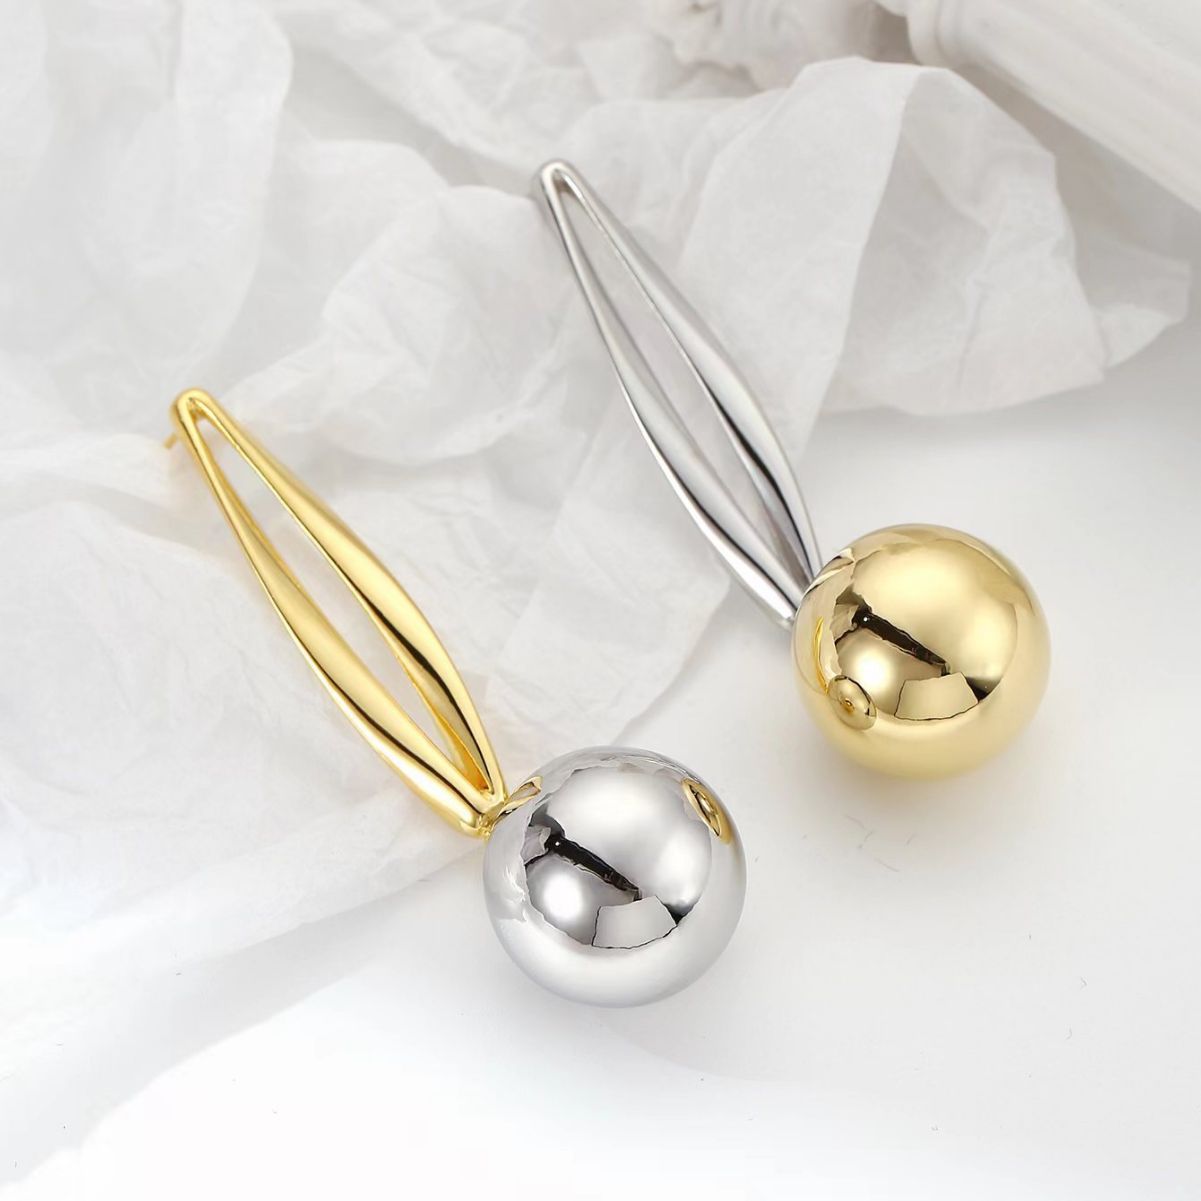 European and American Elegant Large Earrings All-Matching Earrings Simple Ins Affordable Luxury Fashion Earrings Spherical New Fashion All-Matching